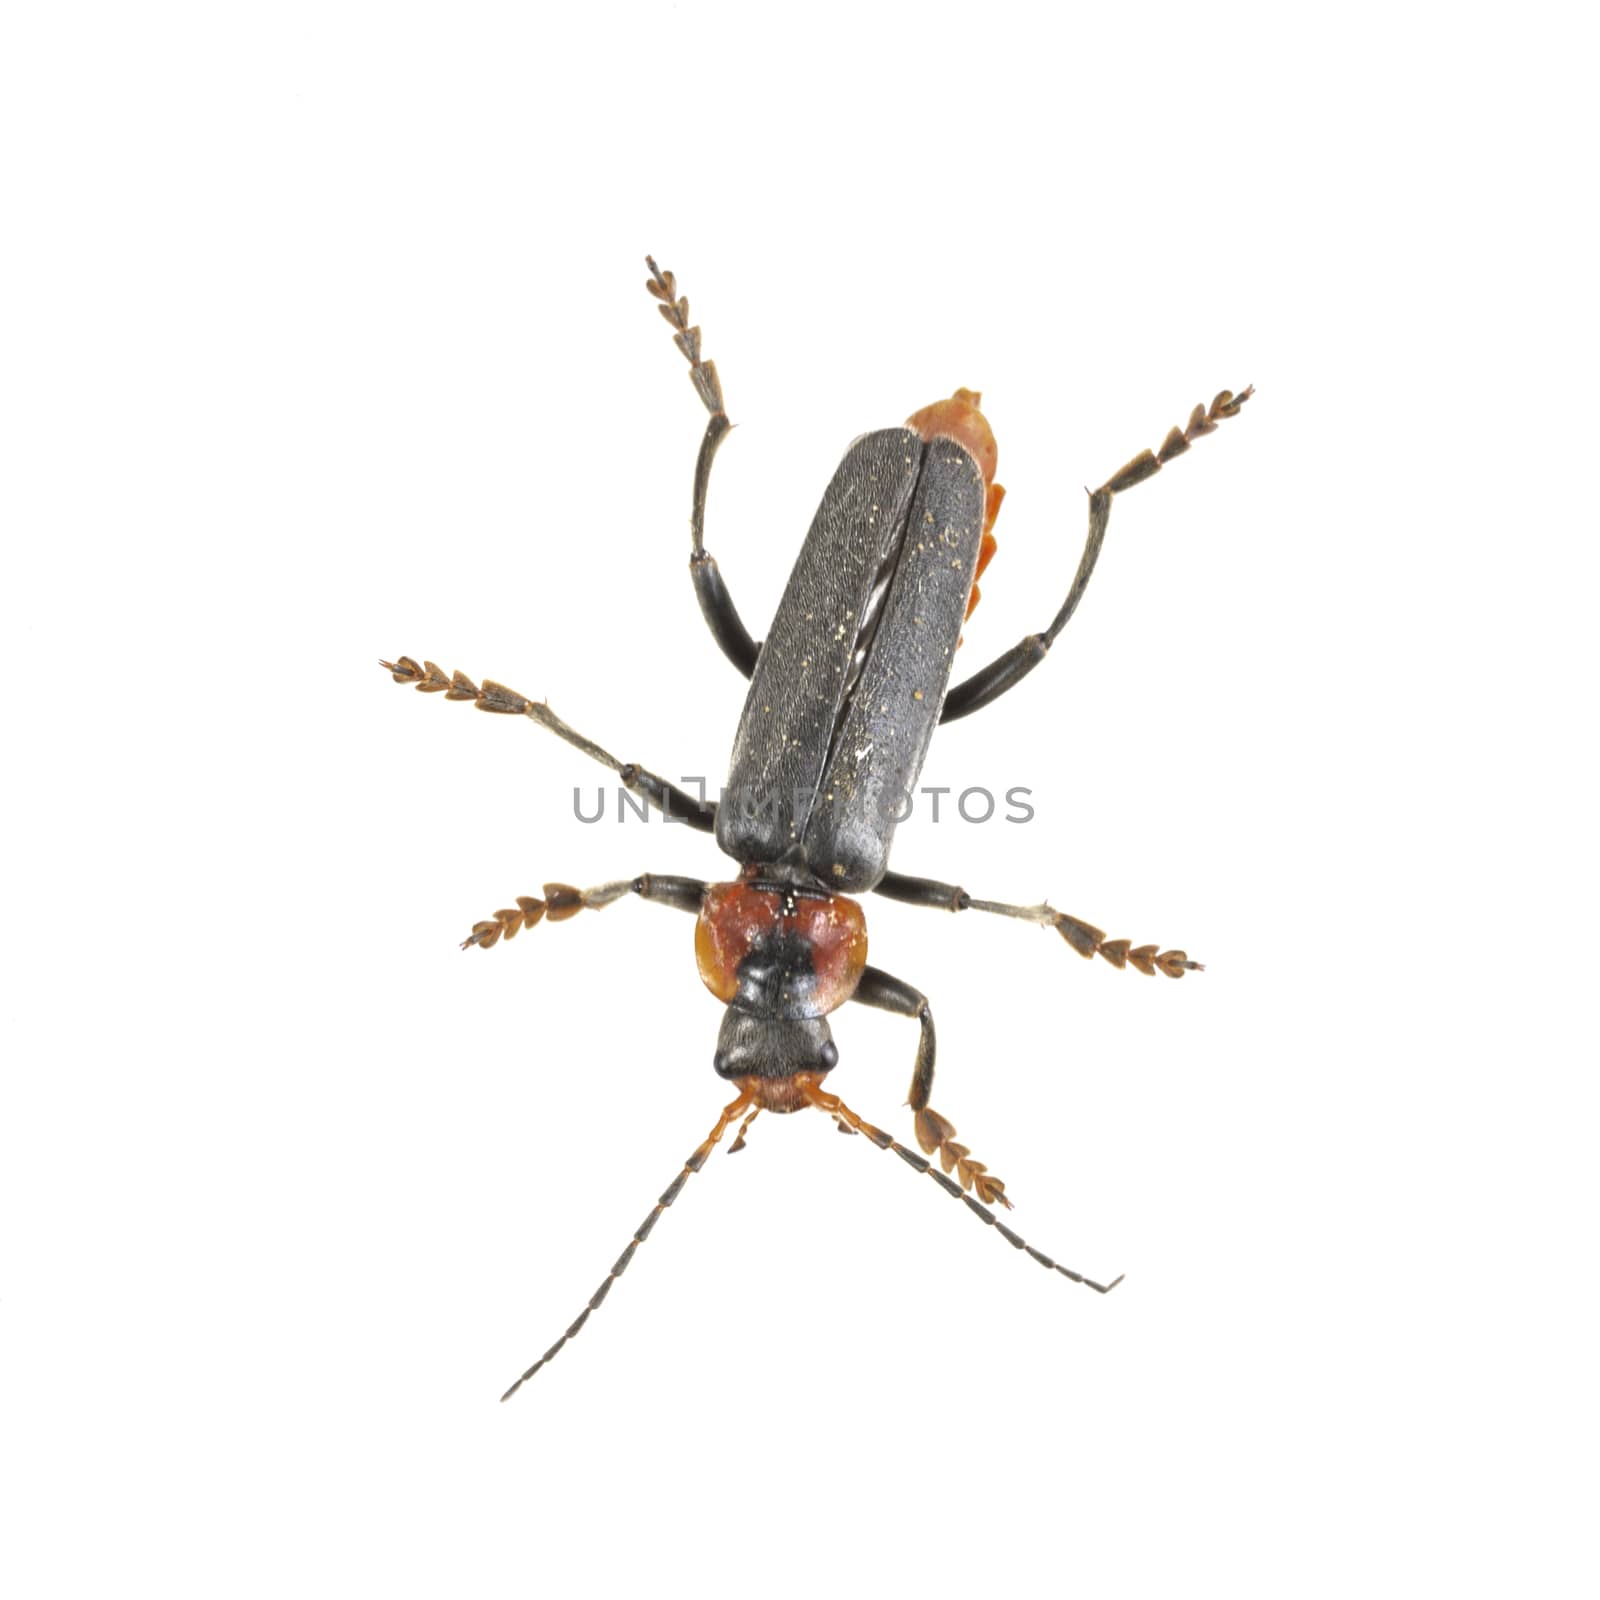 Soldier beetle isolated on a white background